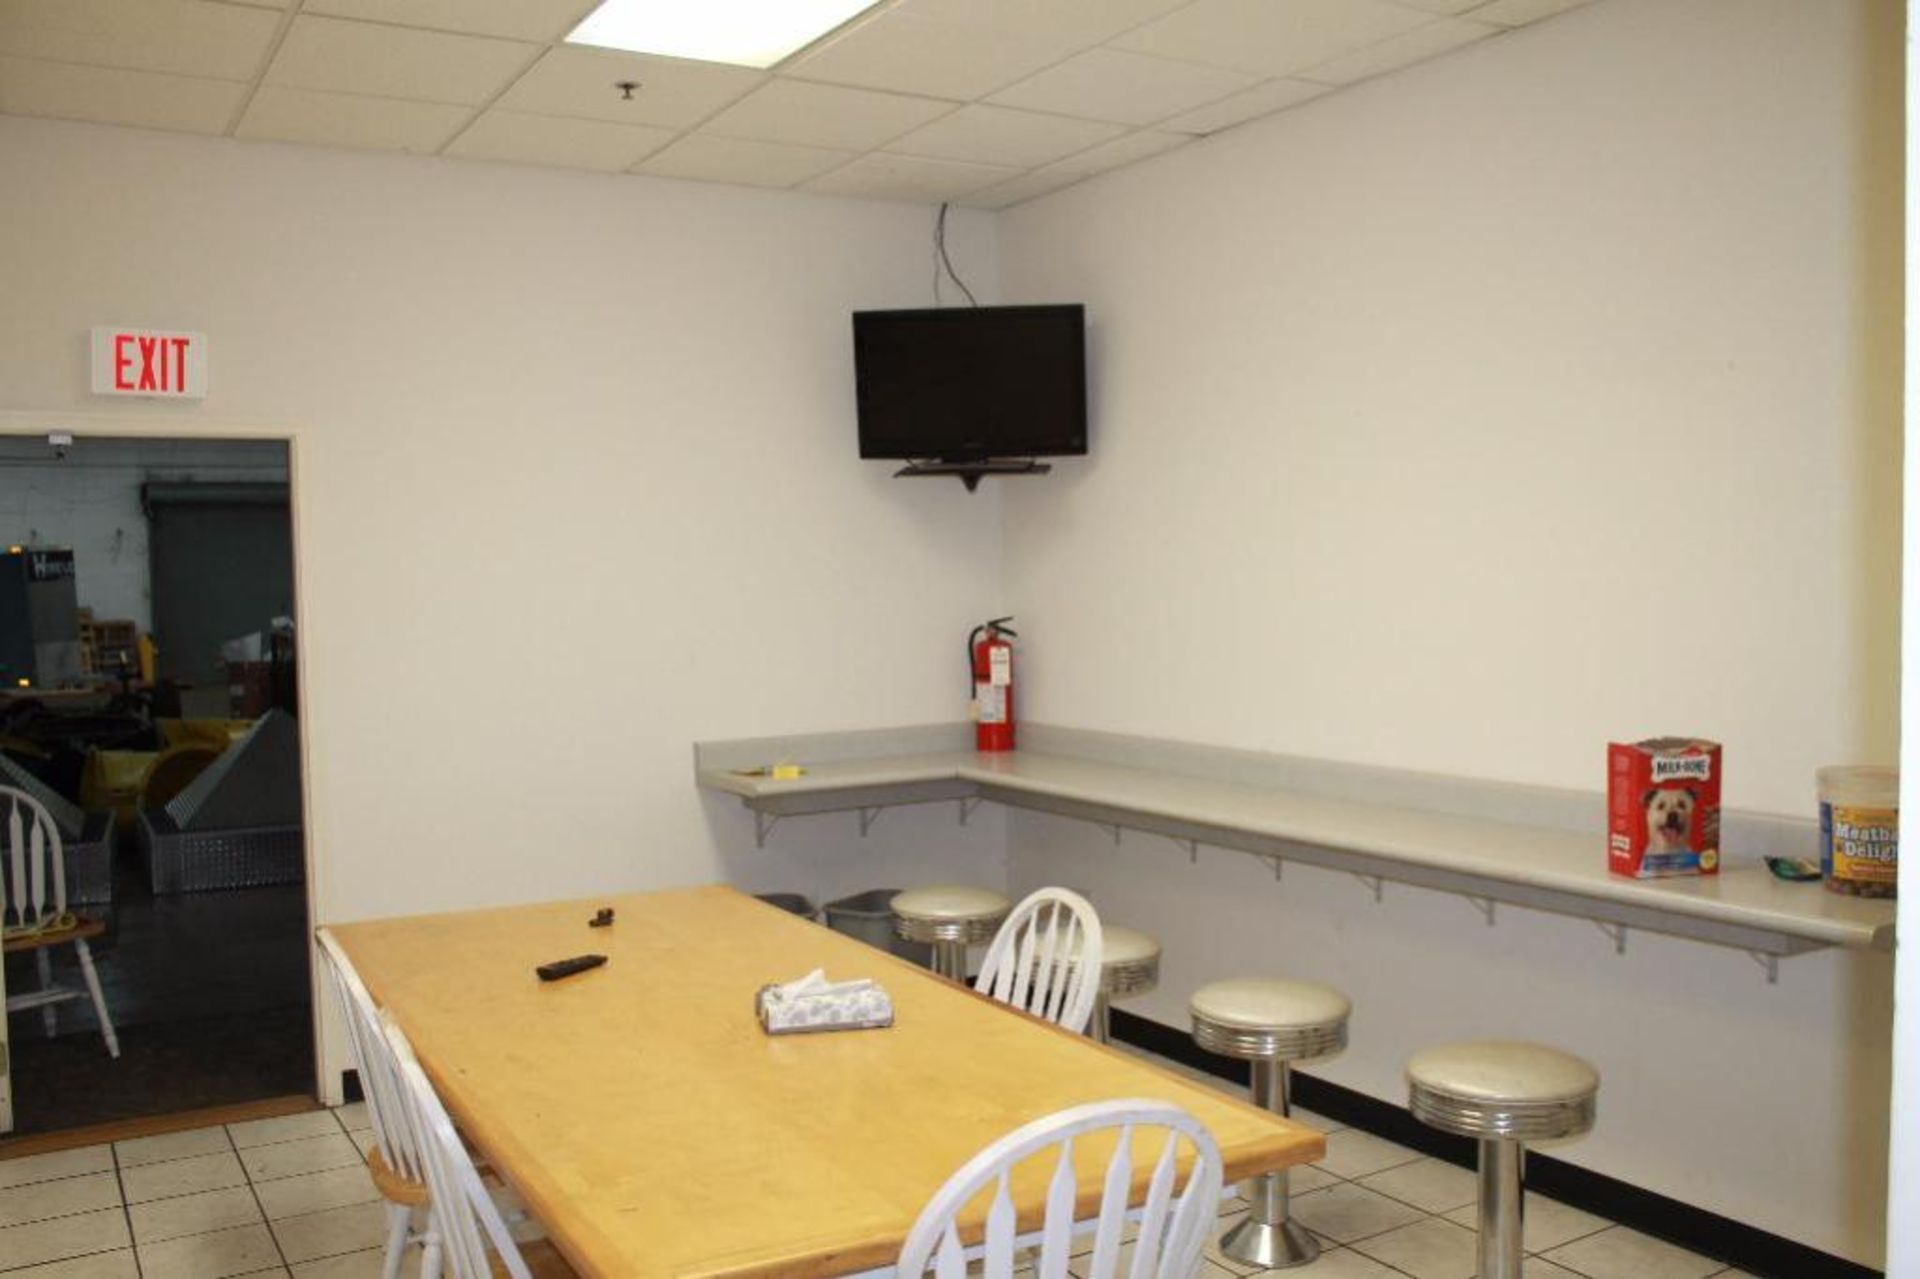 Cafeteria Table, Chairs, TV, TV Mount, Refrigerator, Microwave - Image 2 of 3